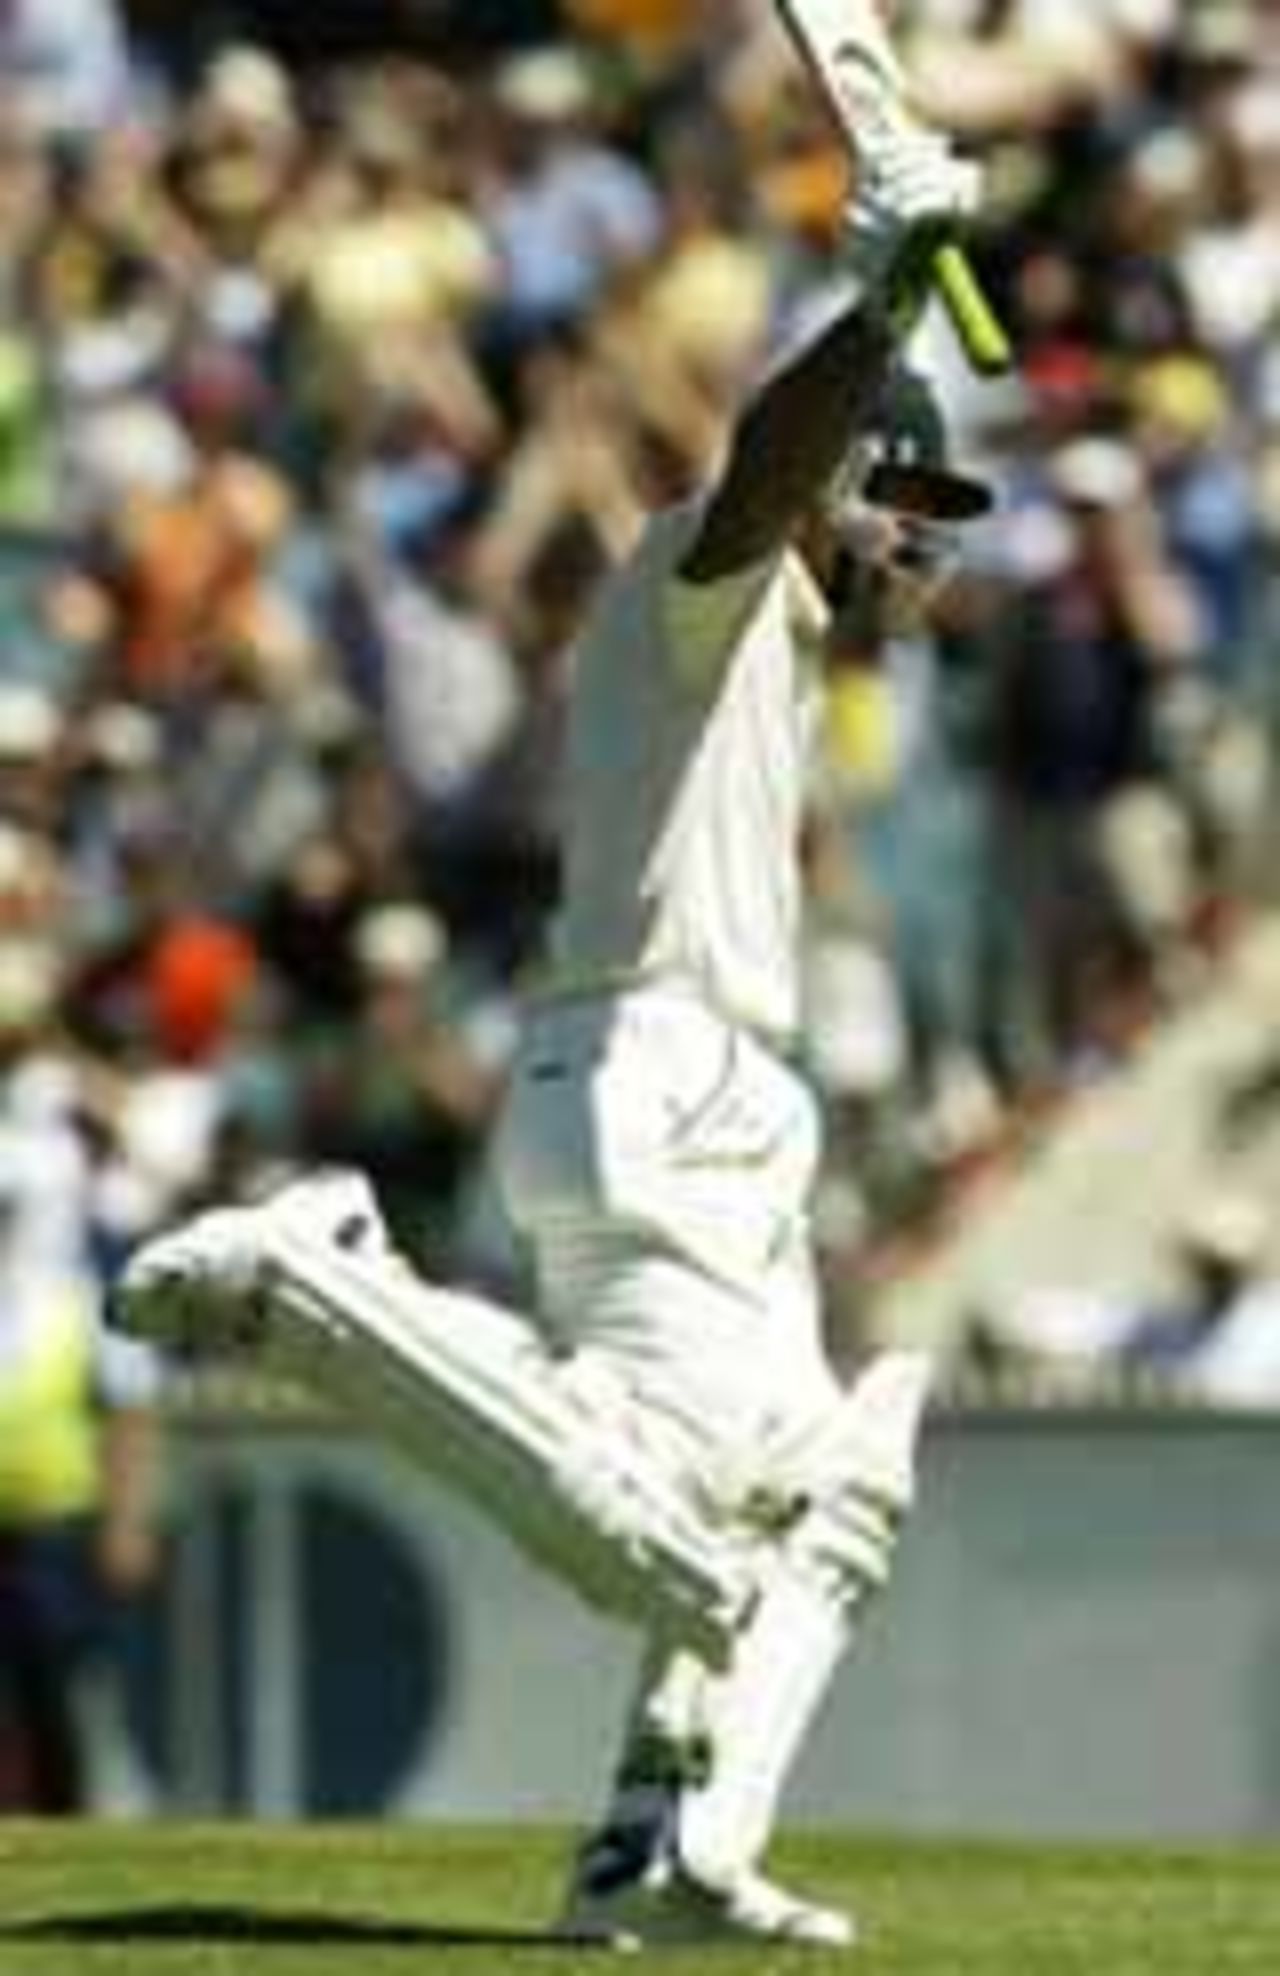 Ricky Ponting runs on after achieving the double-century, 3rd Test, Melbourne, 3rd day, December 28, 2003